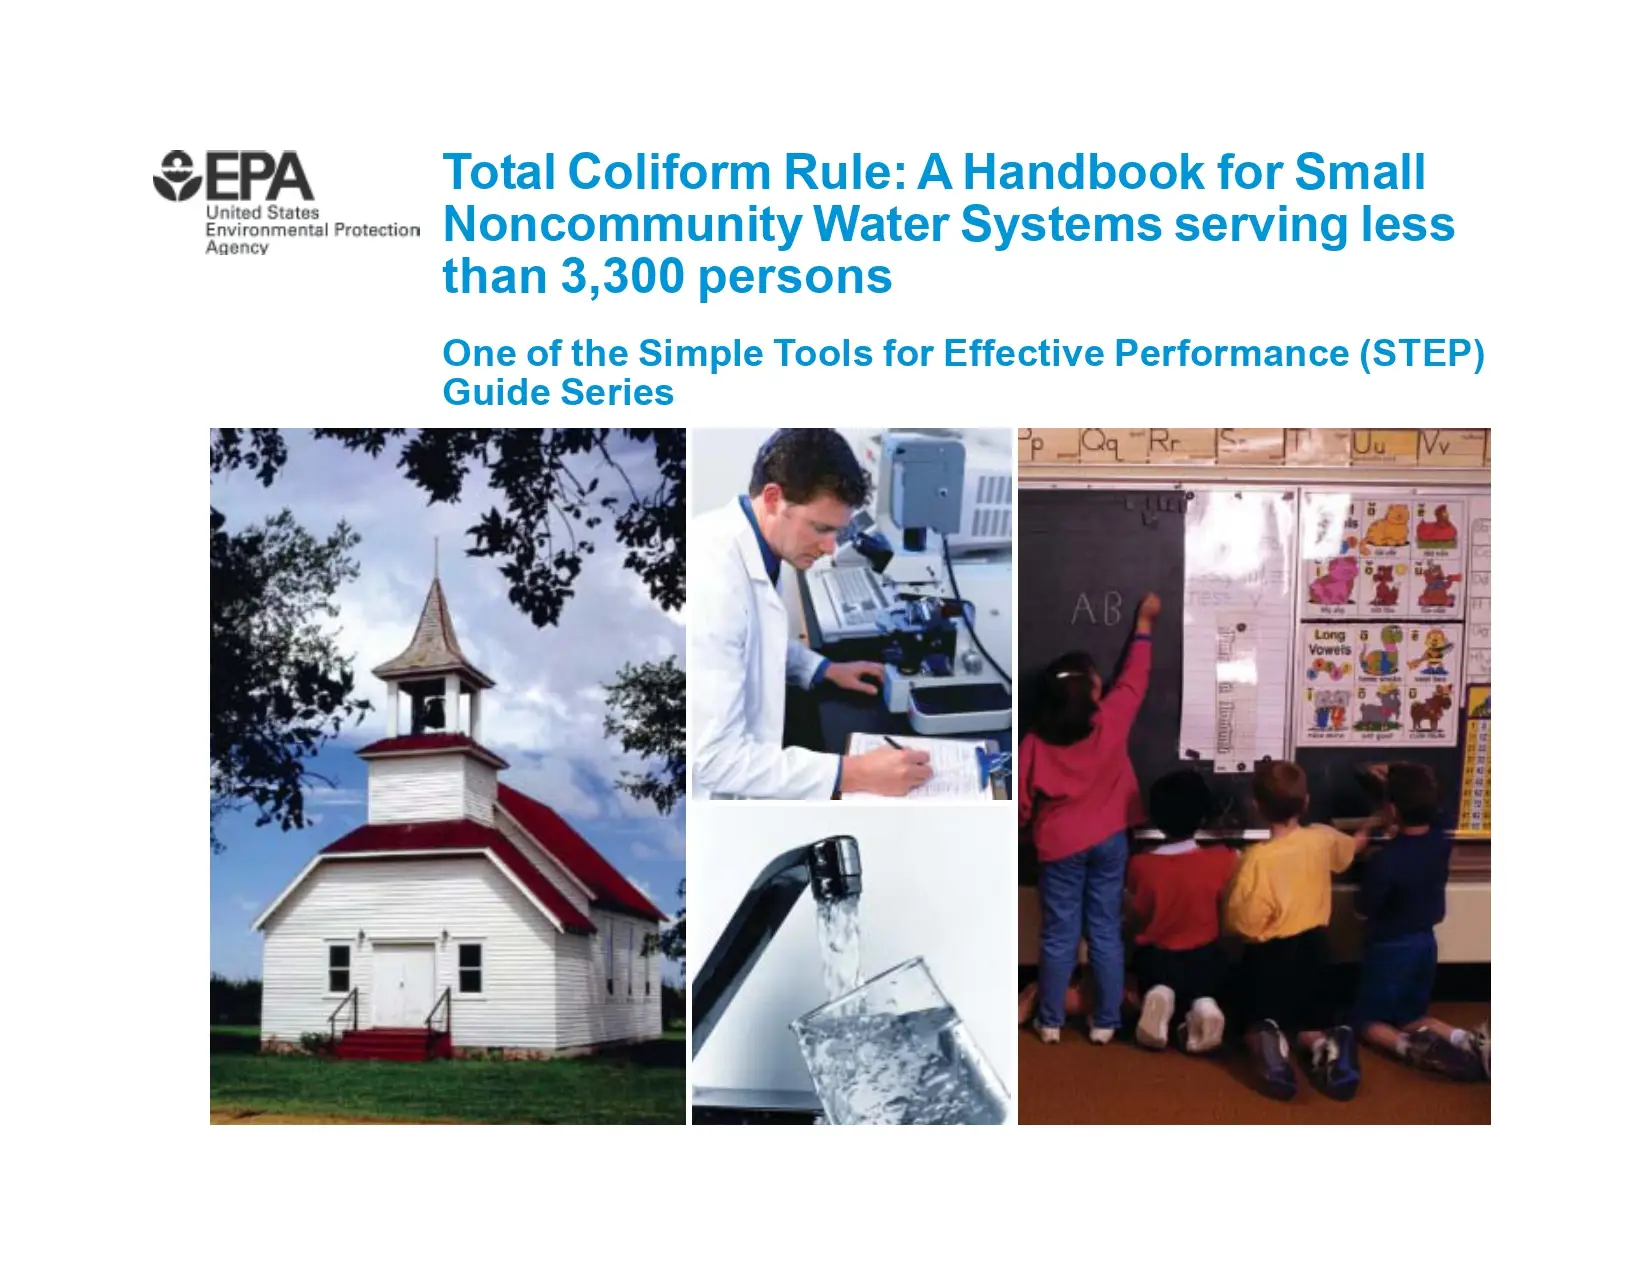 Total Coliform Rule: A Handbook for Small Noncommunity Water Systems serving less than 3,300 persons